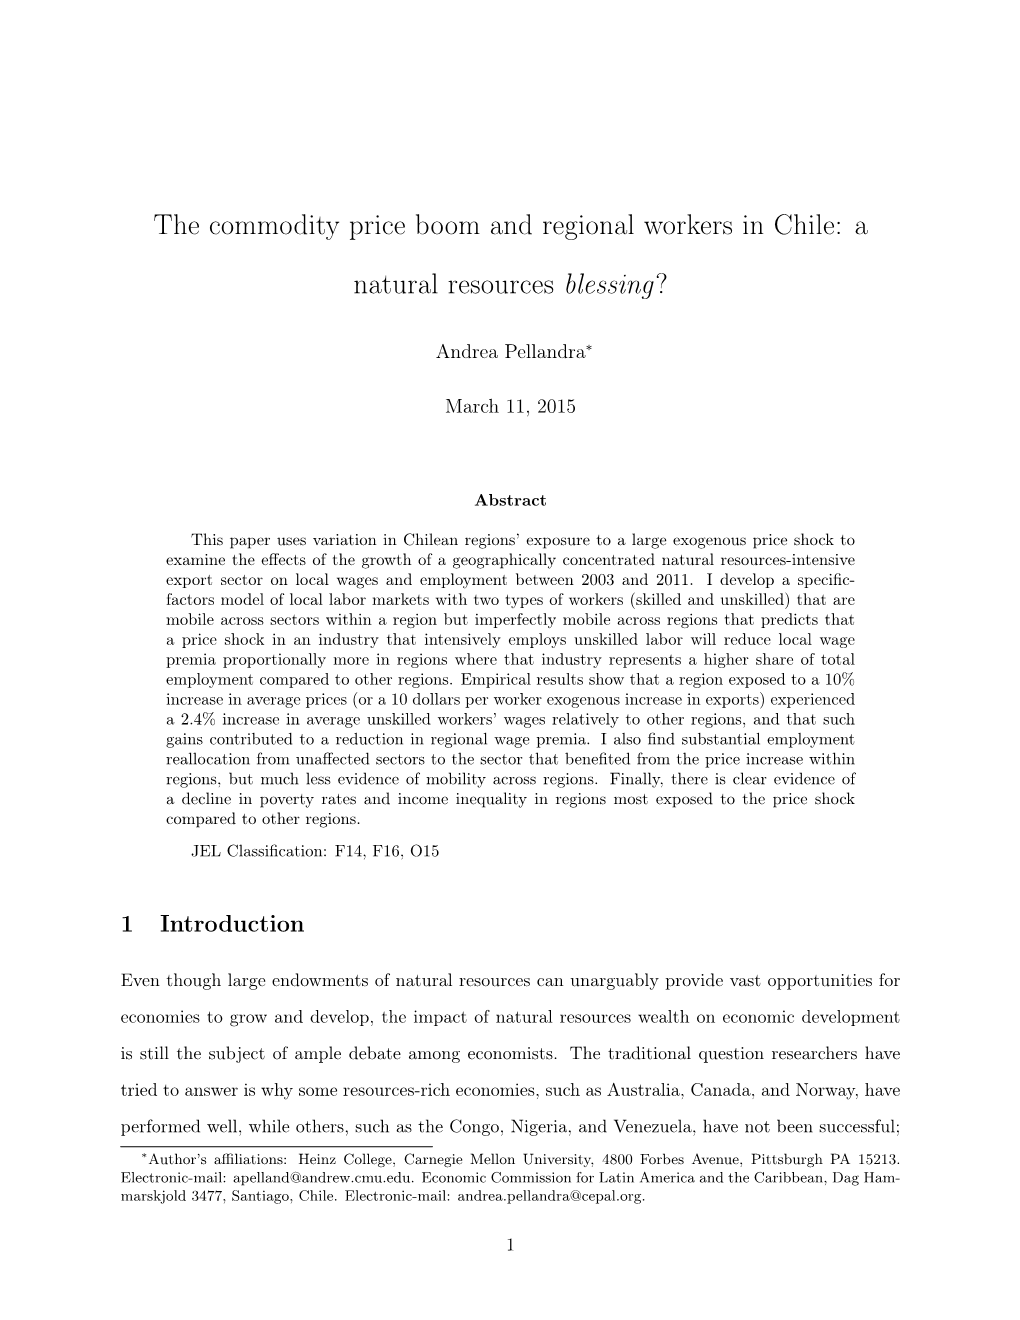 The Commodity Price Boom and Regional Workers in Chile: a Natural Resources Blessing?